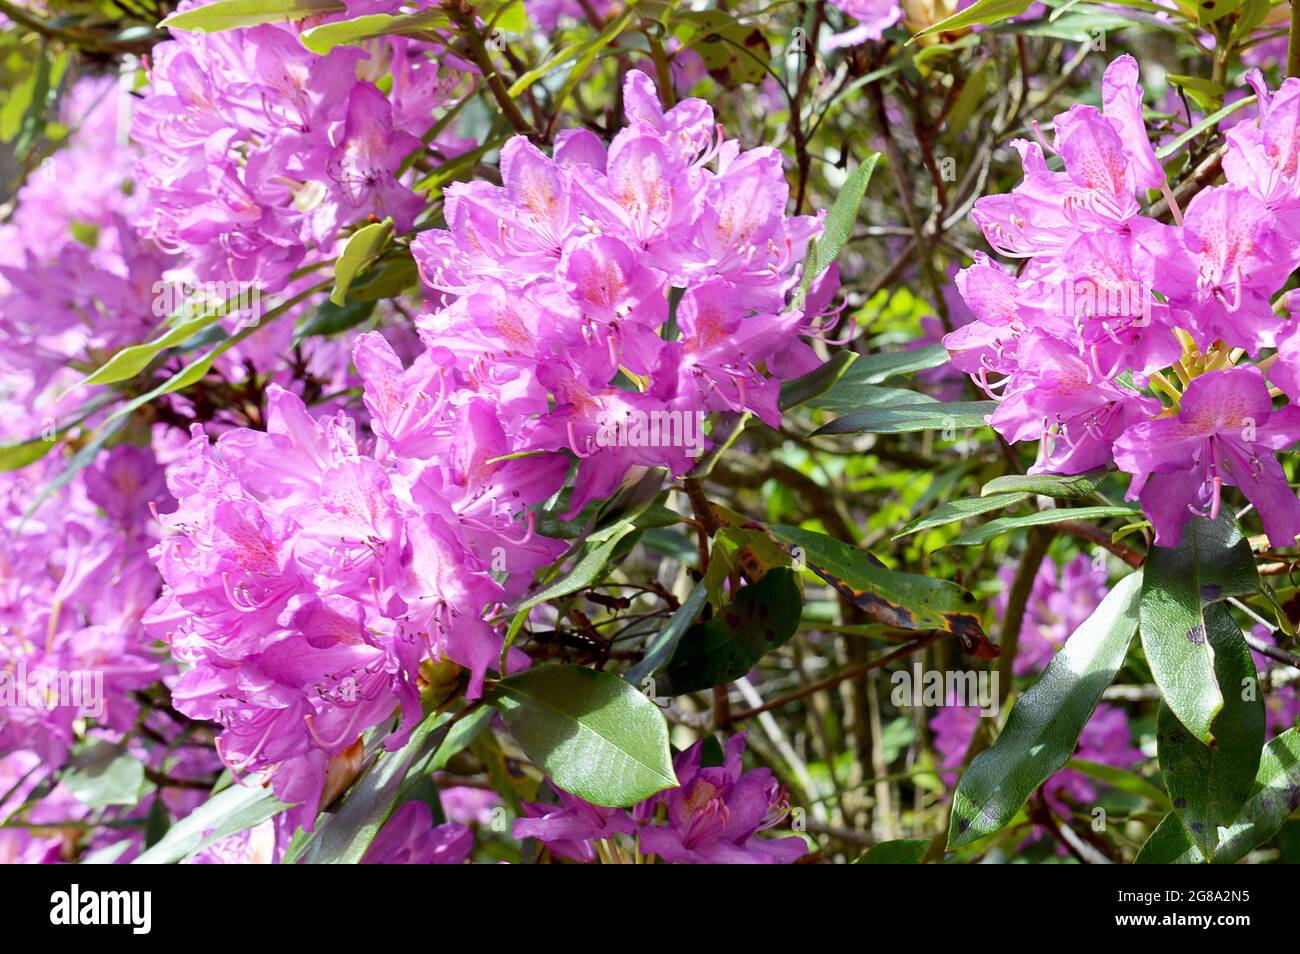 Despite its beautiful pink to purple flowers, this rhodendron (Rhododendron ponticum) is regarded as Scotland's most invasive non-native plant. Stock Photo